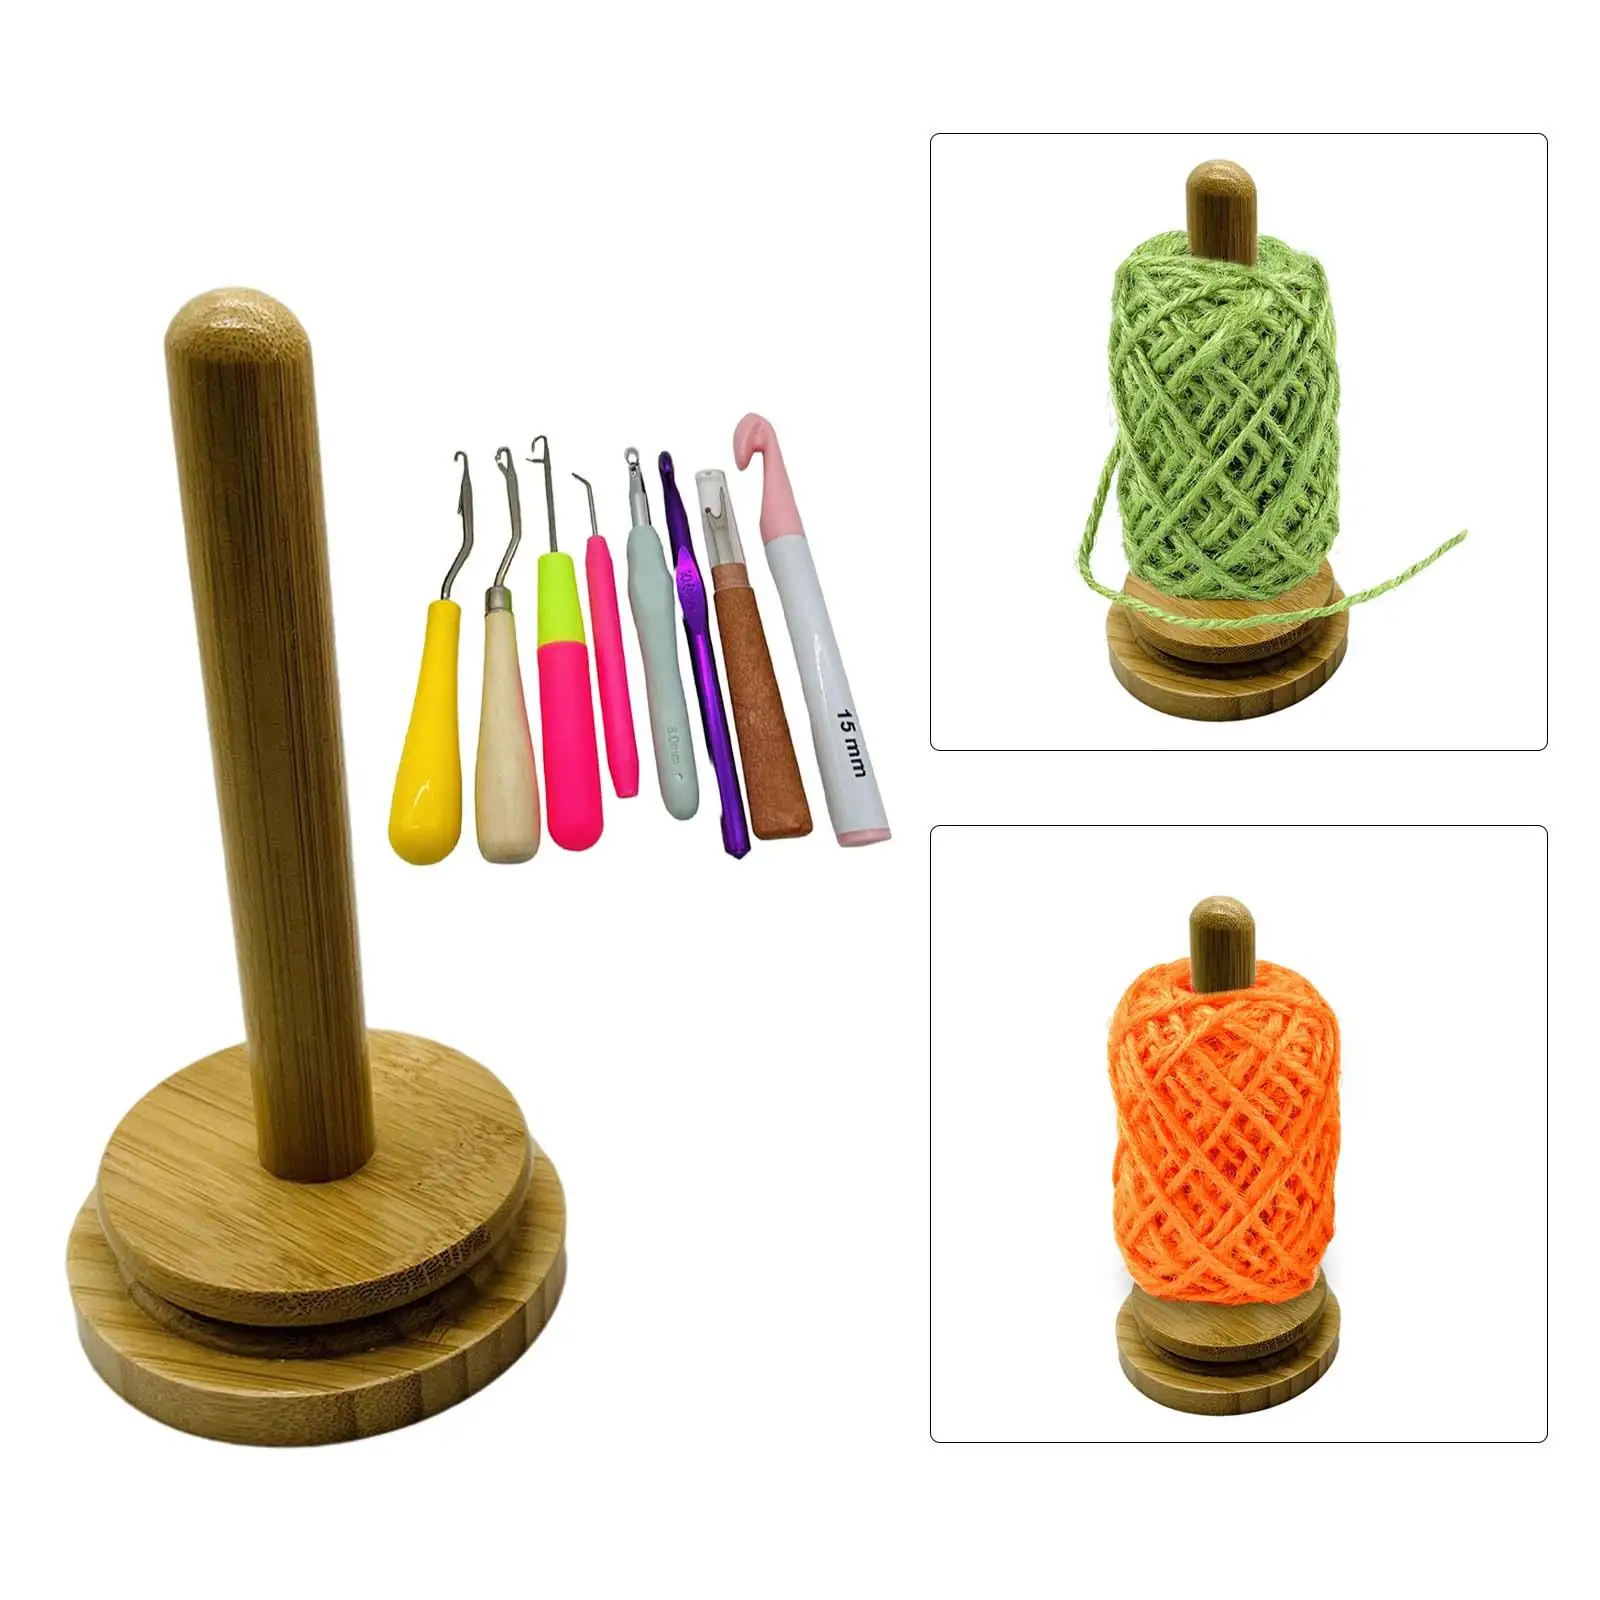 Yarn Ball Holder with 8 Crochet Hooks Yarn Rolling Holder for Ribbon Adults Sewing Prevent Yarn Tangling, Winding Crafts Lover